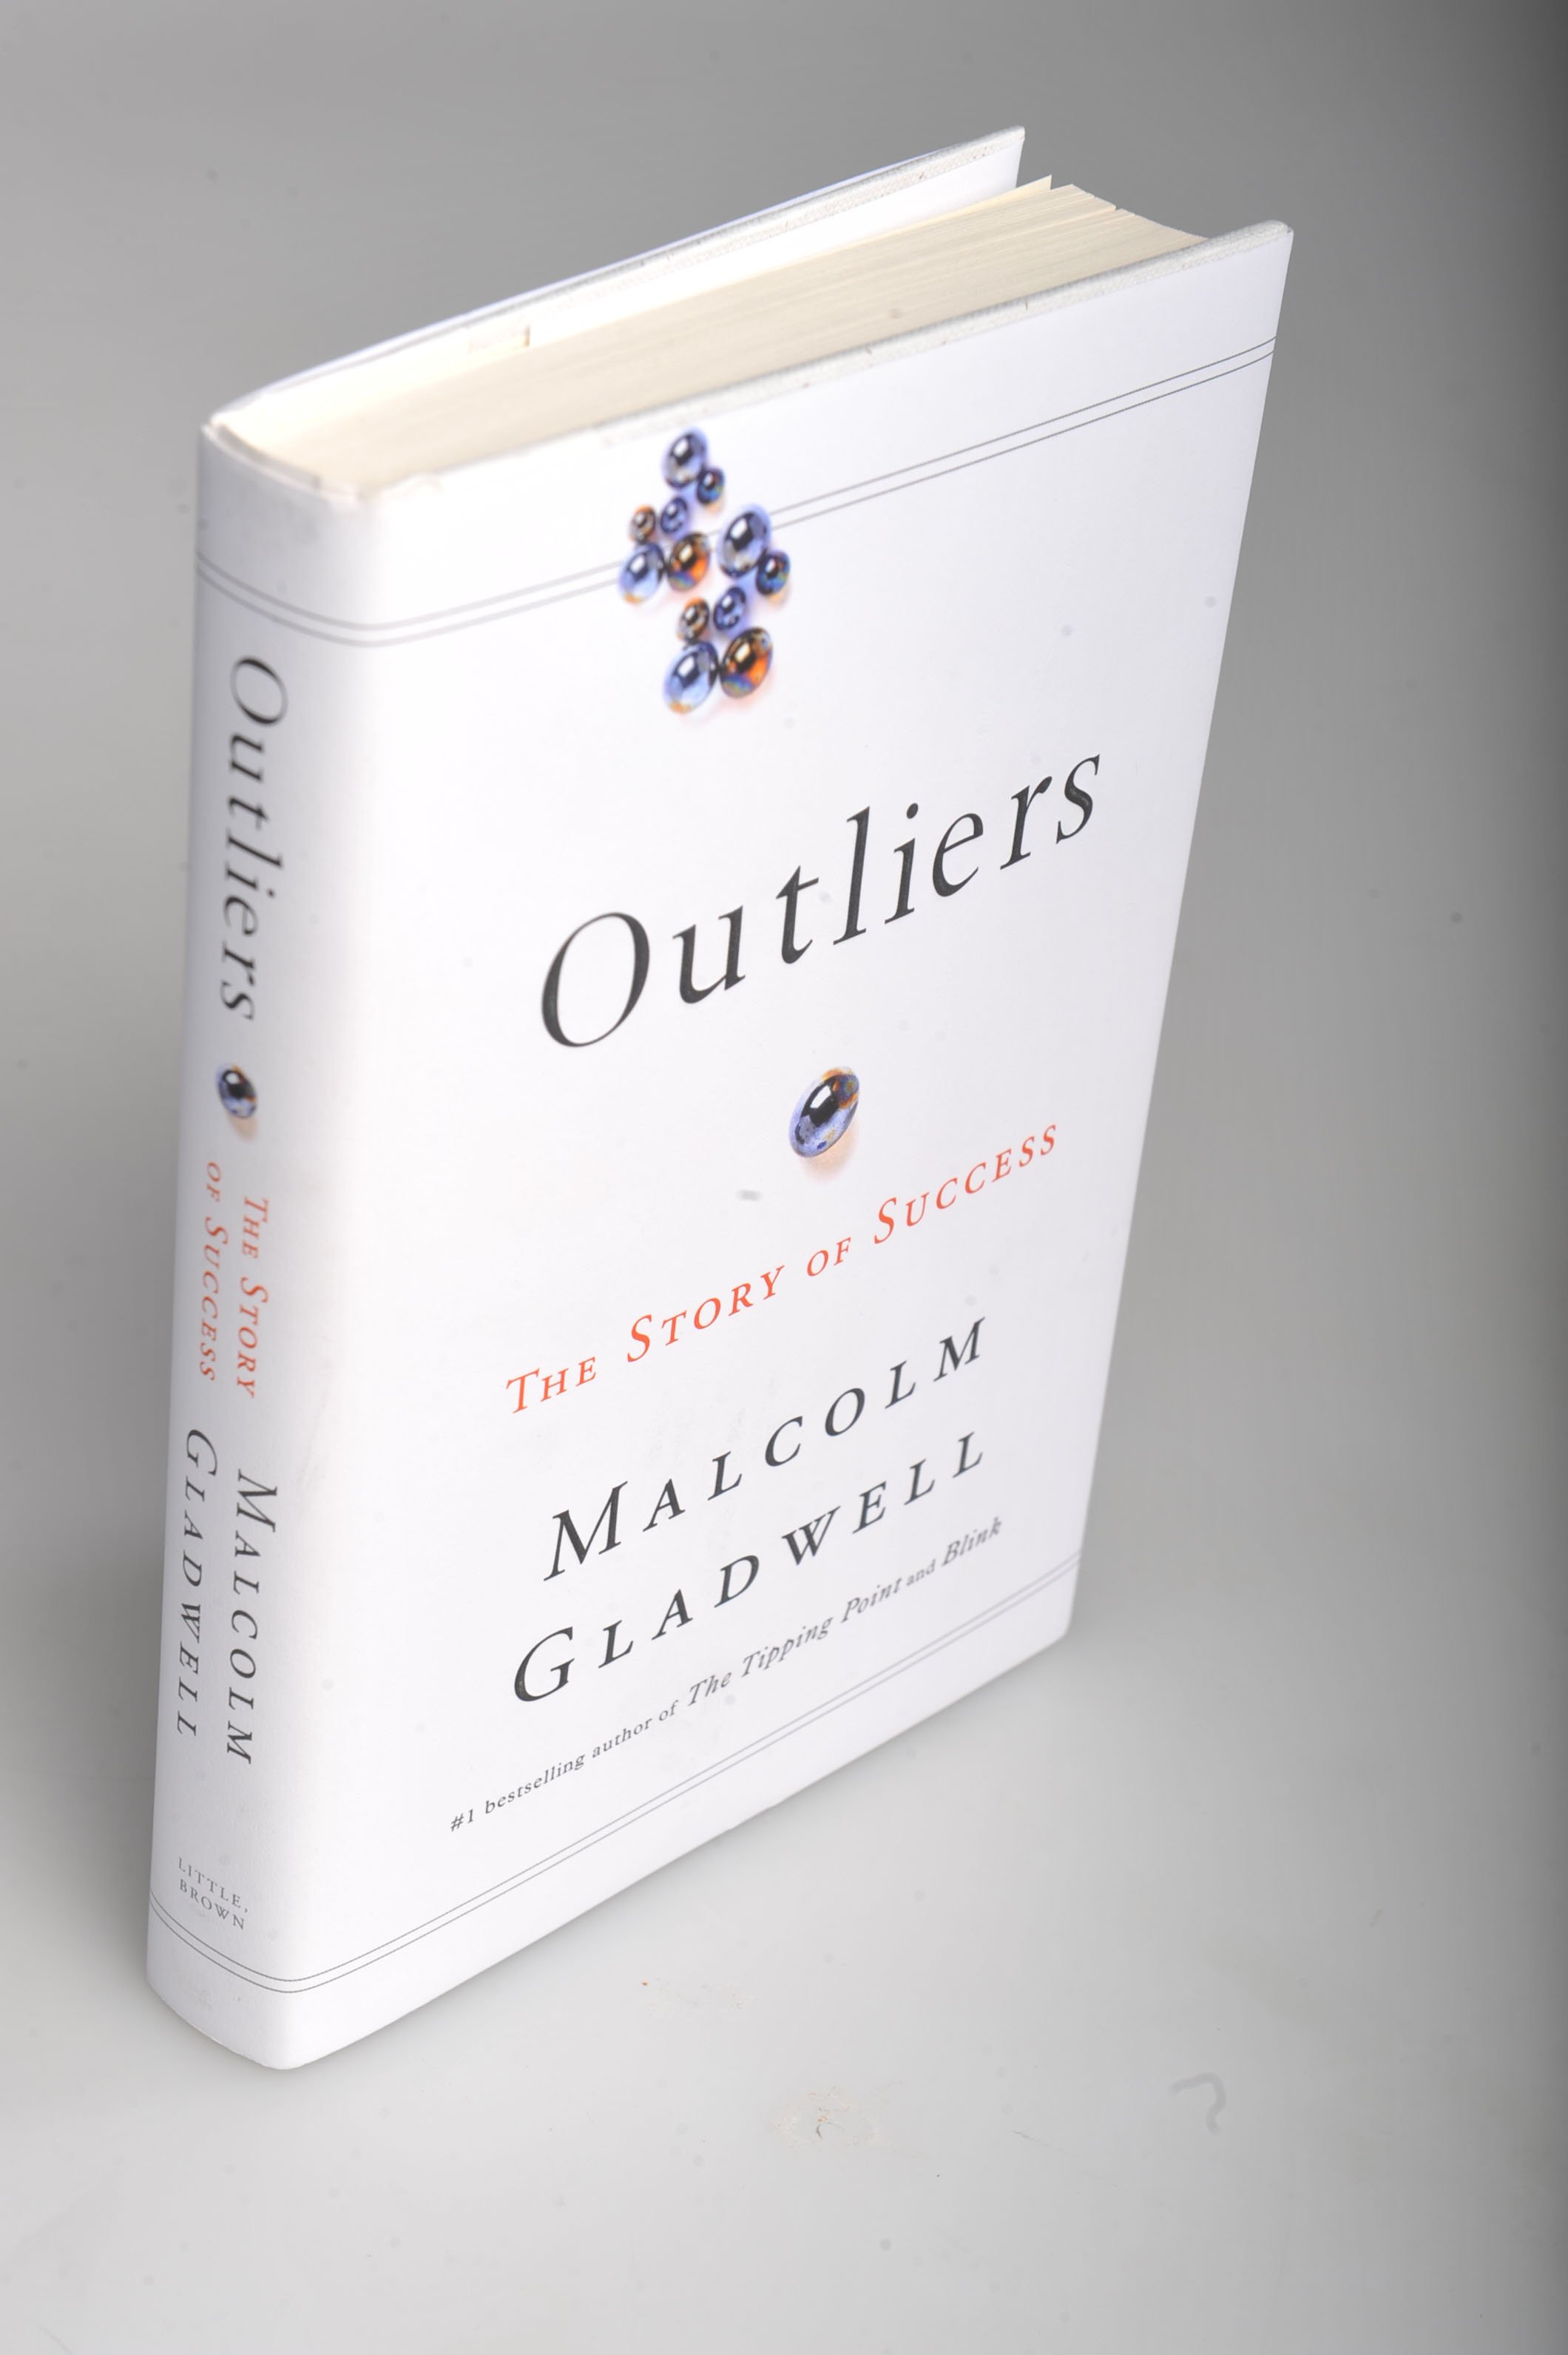 A copy of "Outliers" by Malcolm Gladwell on display by Sunday Books on November 19, 2008 | Source: Getty Images